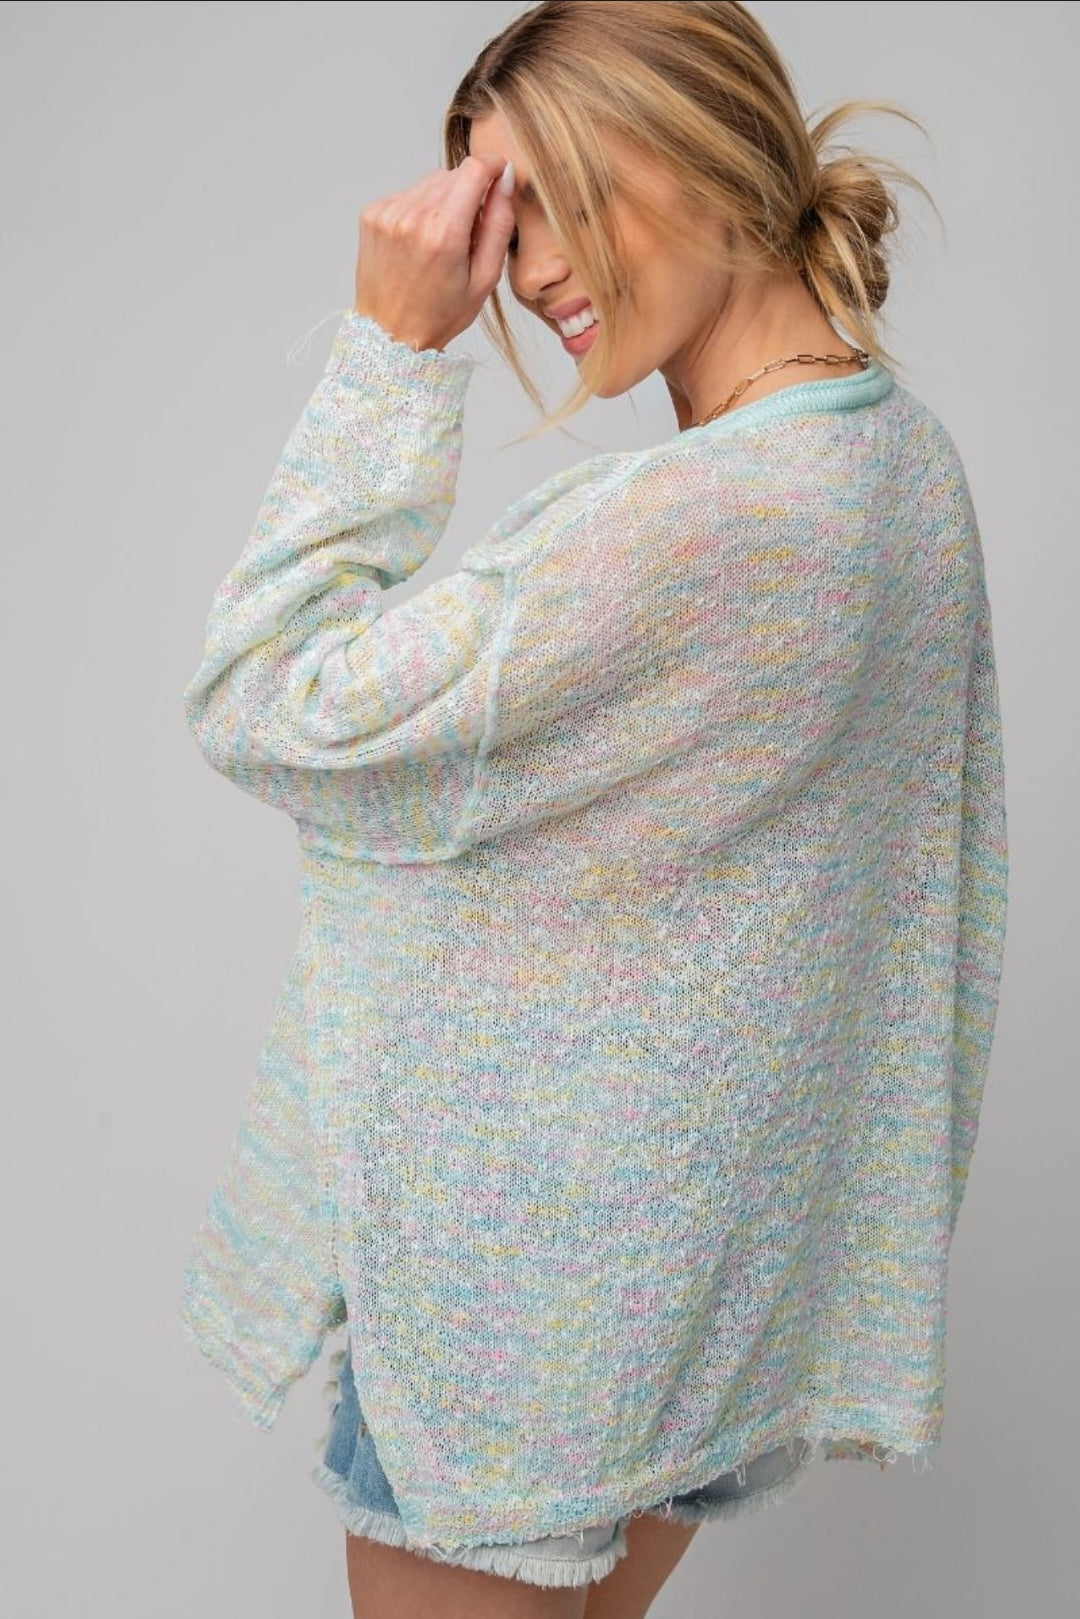 Chessley Light Weight Knit Sweater (Multi Color)